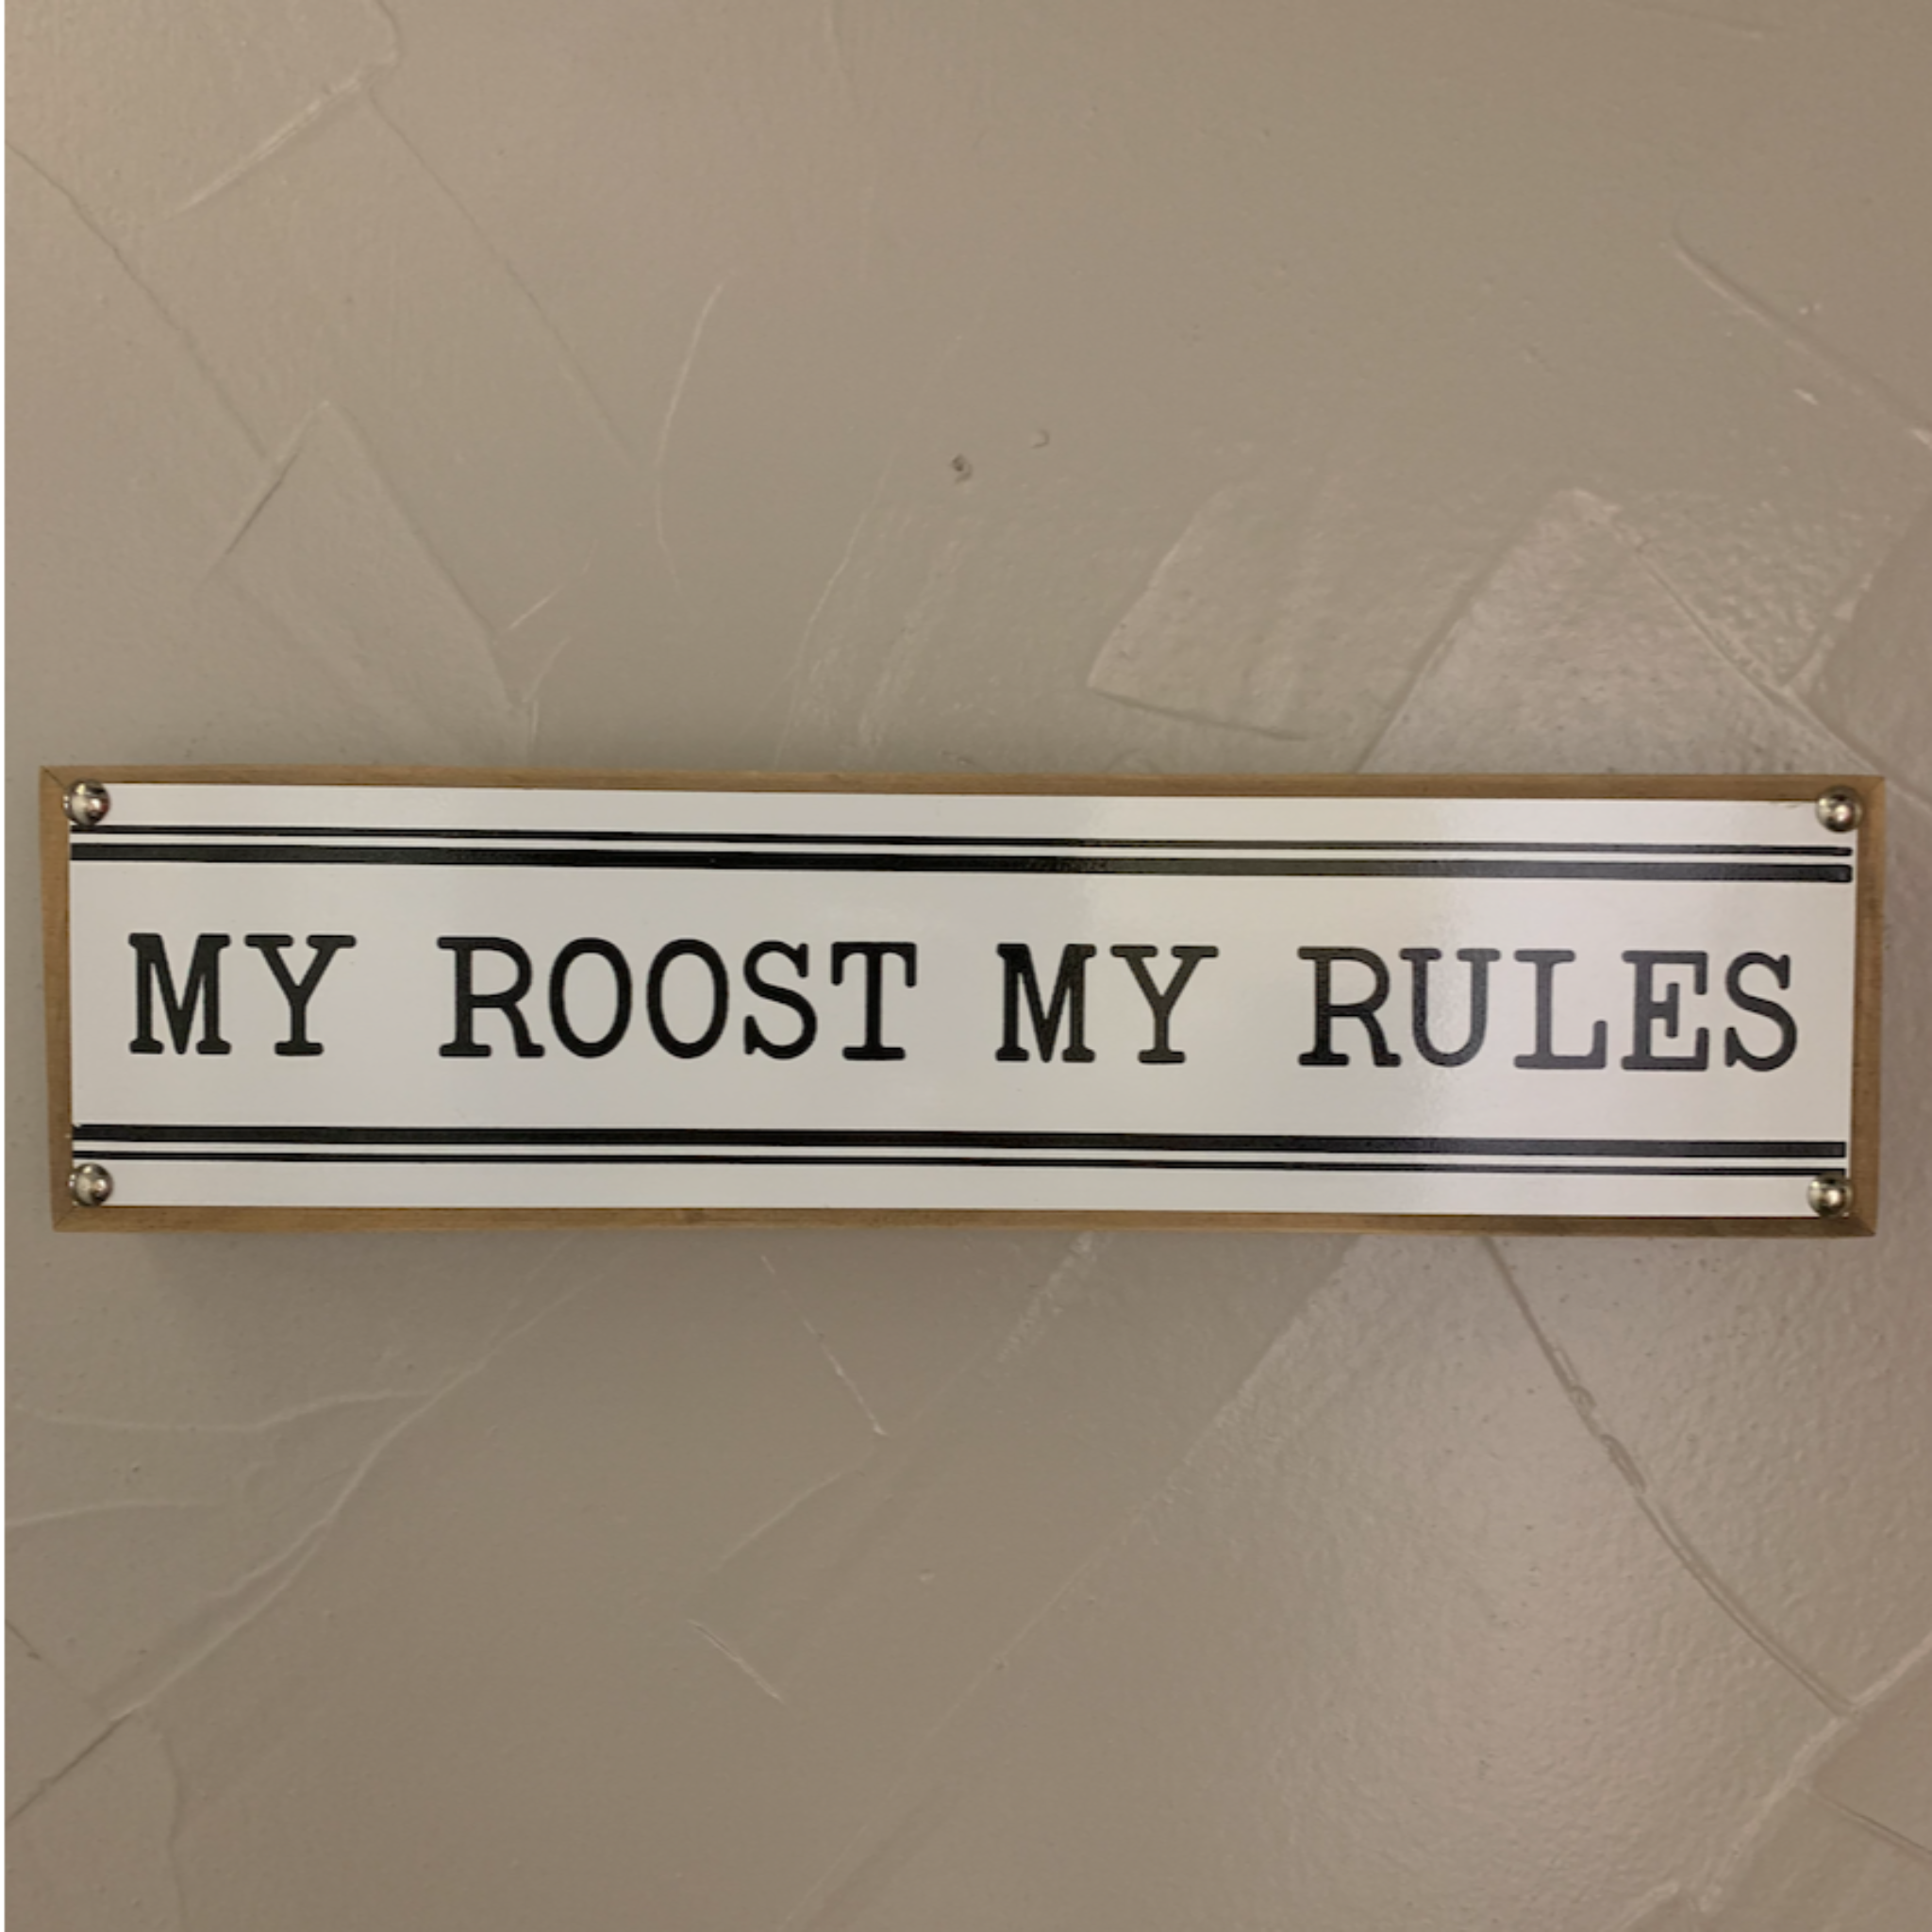 My Roost My Rules